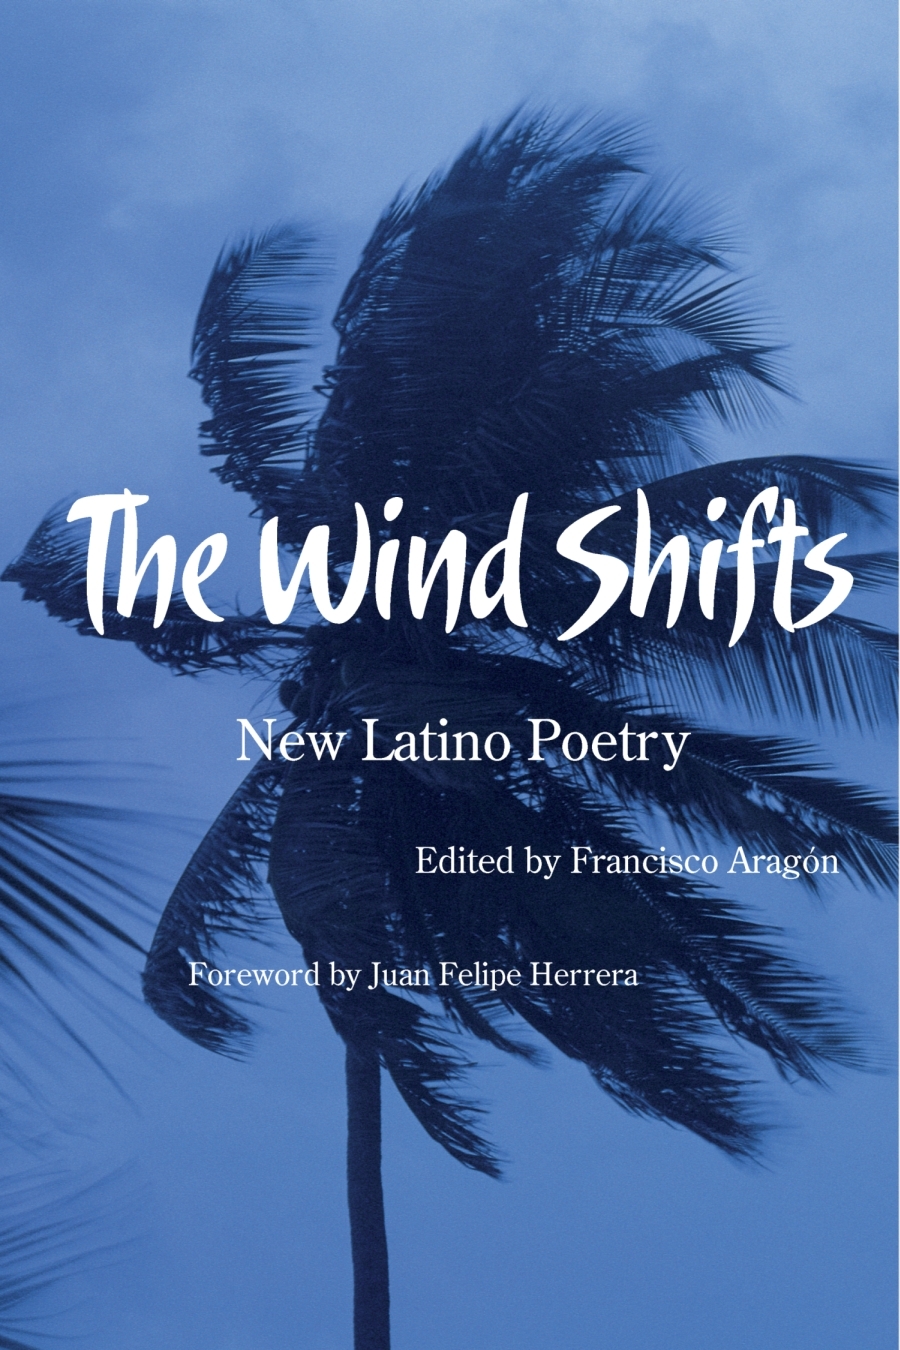 [Wind+Shifts+COVER.JPG]